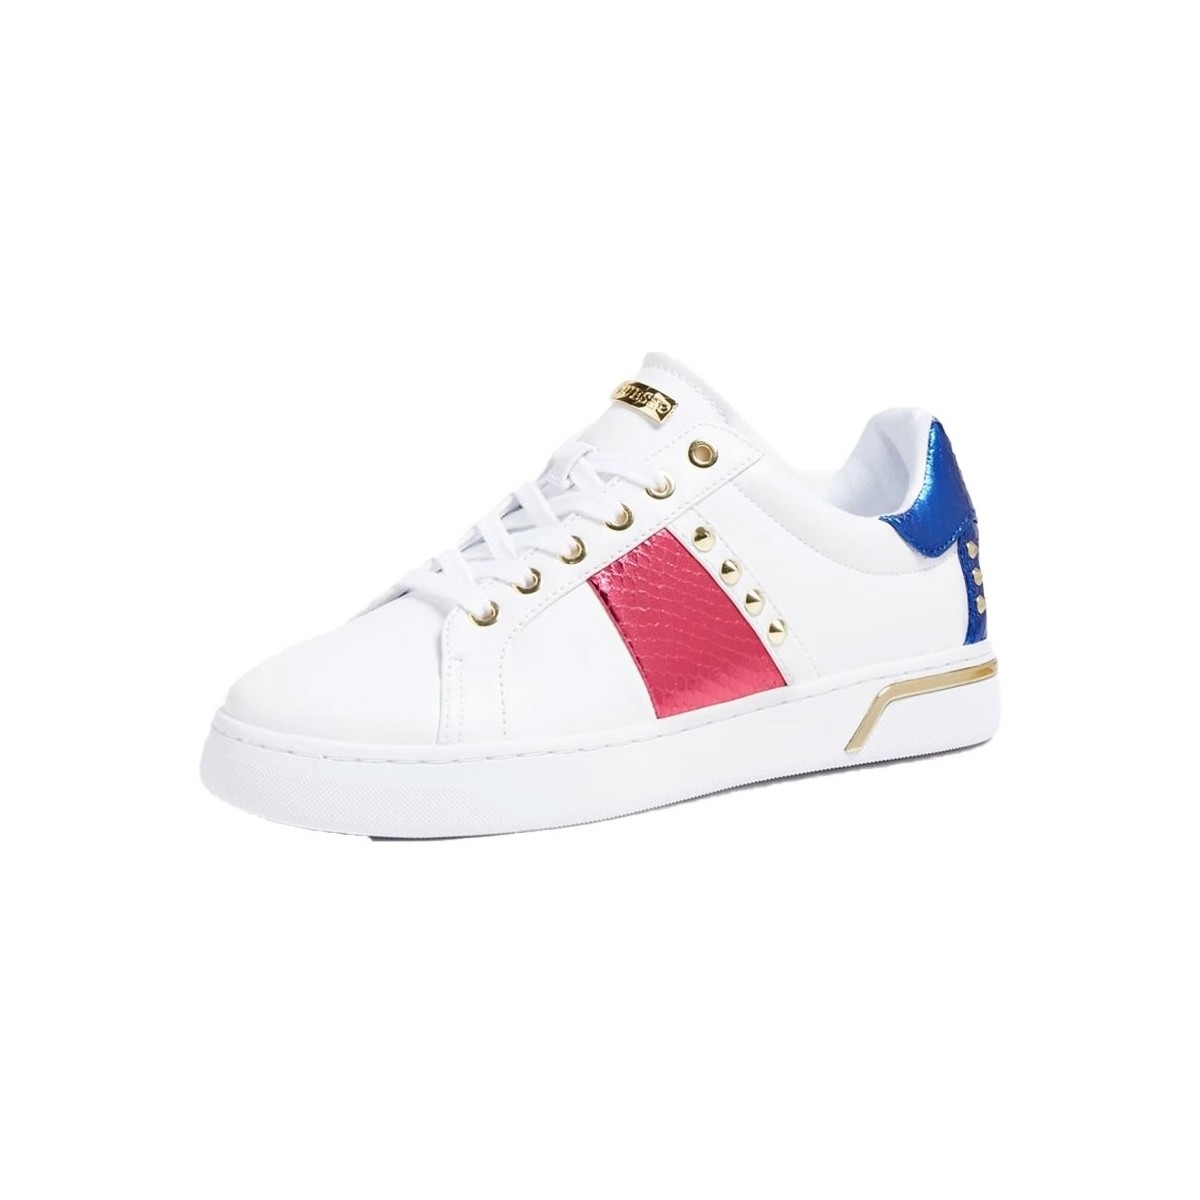 Chaussures Femme Baskets basses Guess Baskets  ref 52790 Whifu Blanc Blanc